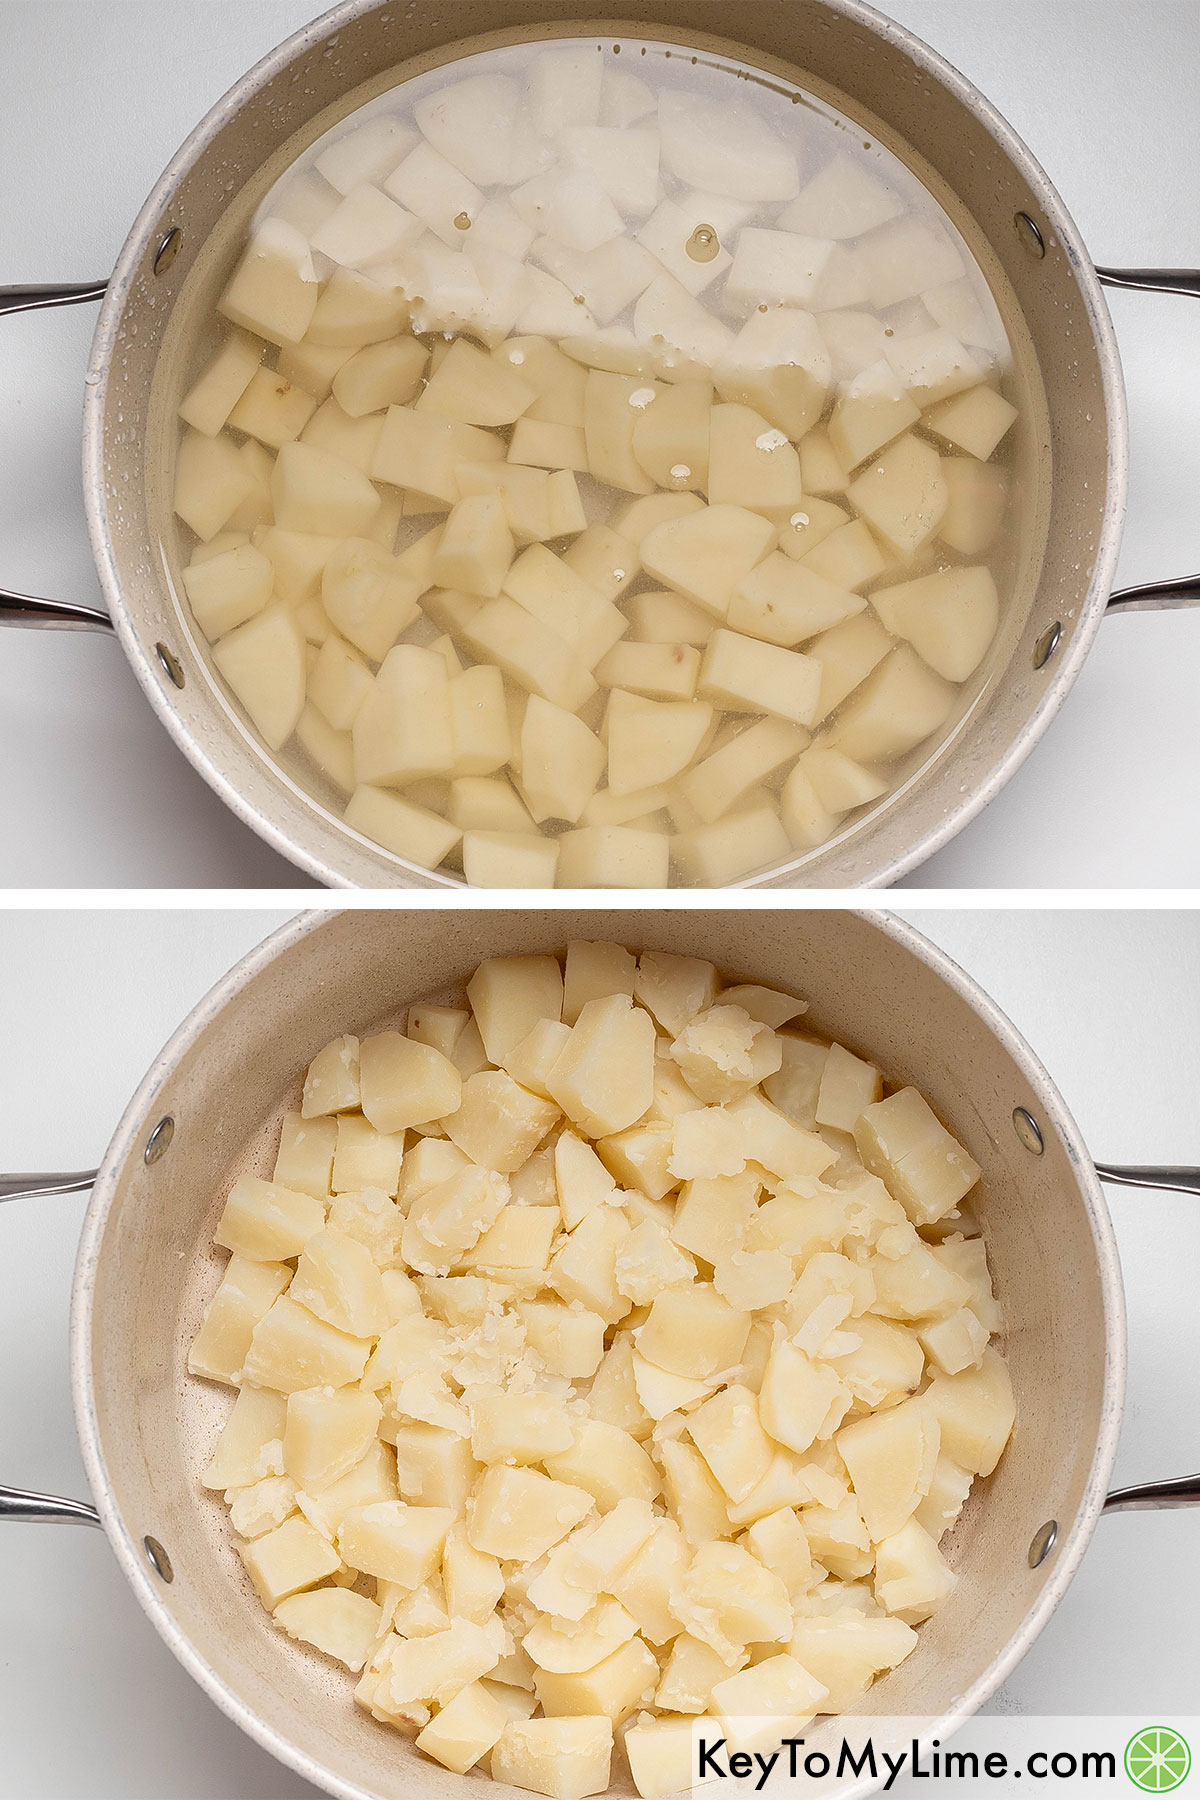 Boiling the cut up potatoes in a large pot, and then draining the potatoes and adding back.